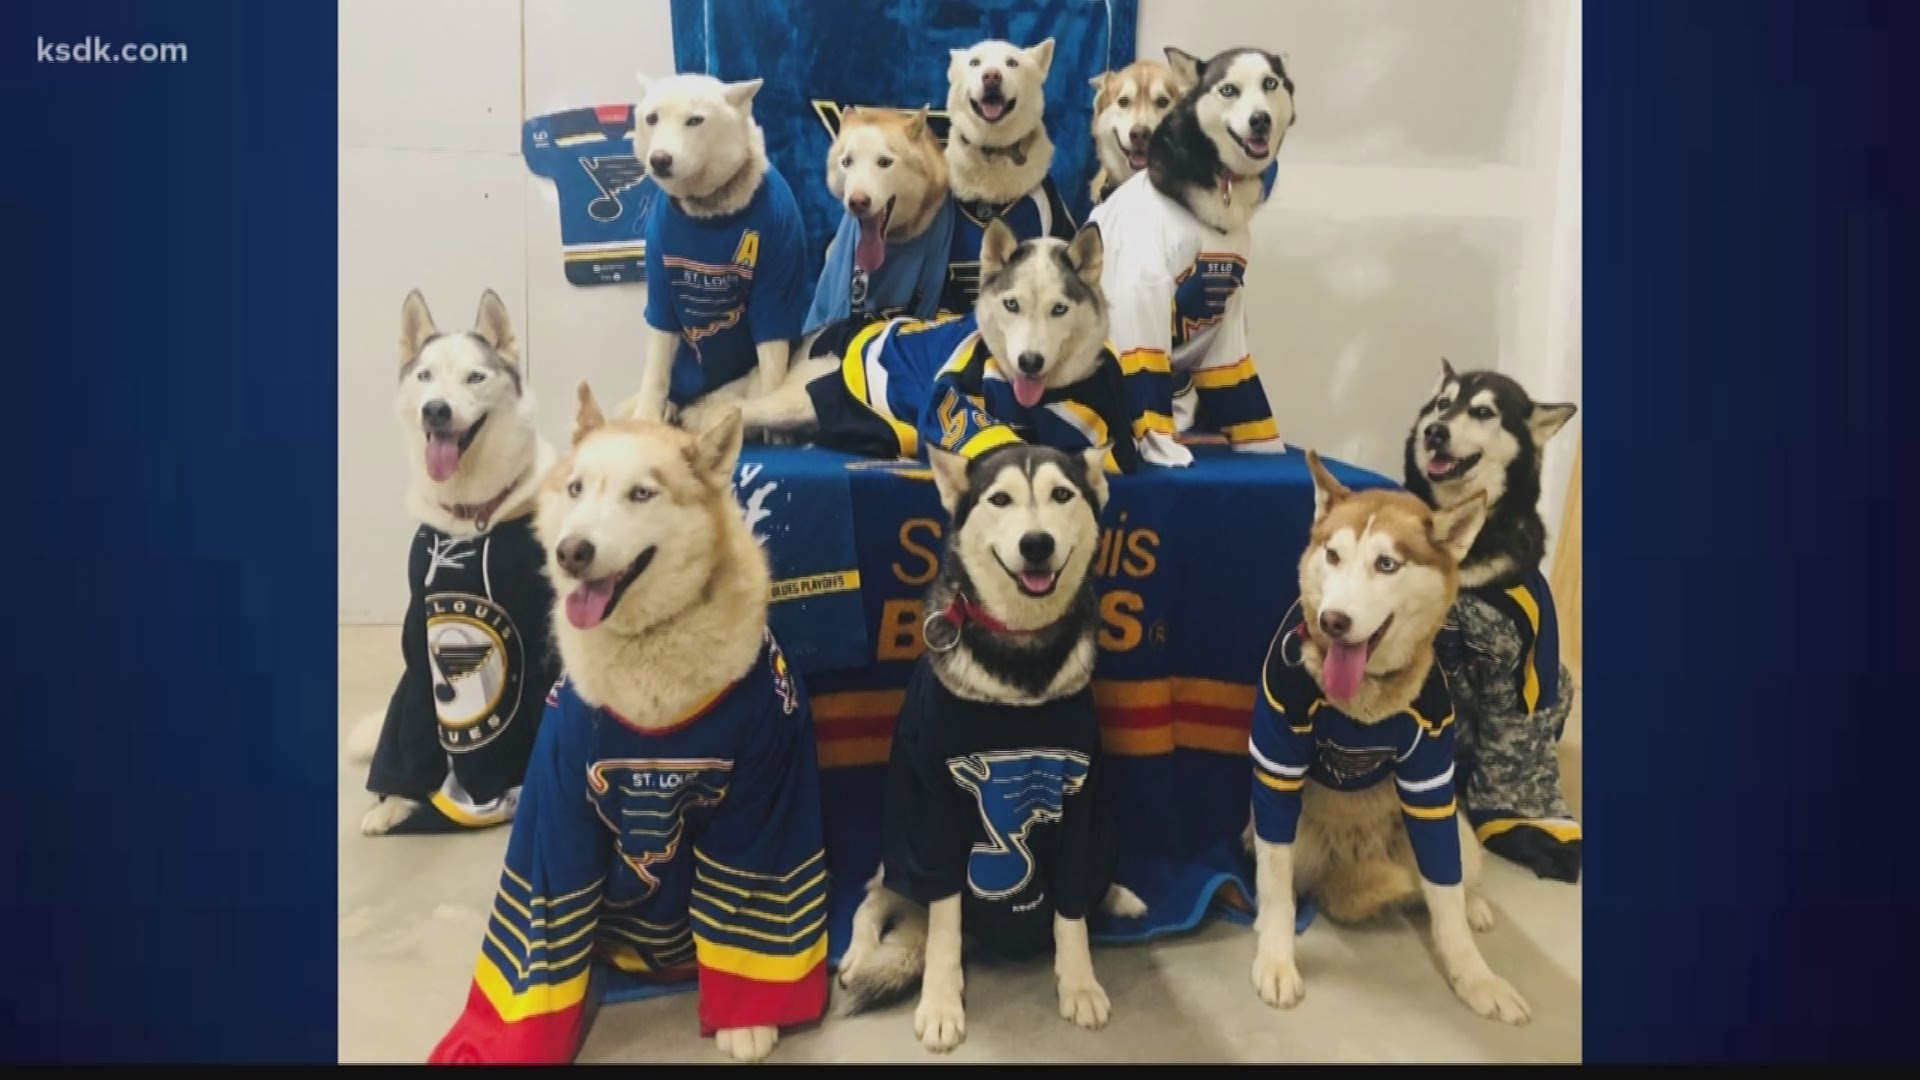 A Hillsboro man has combined his love of Blues hockey with his passion for Siberian huskies. For Richie Camden, "he shoots, he scores!" means a great photograph. 5 On Your Side's Art Holliday reports.